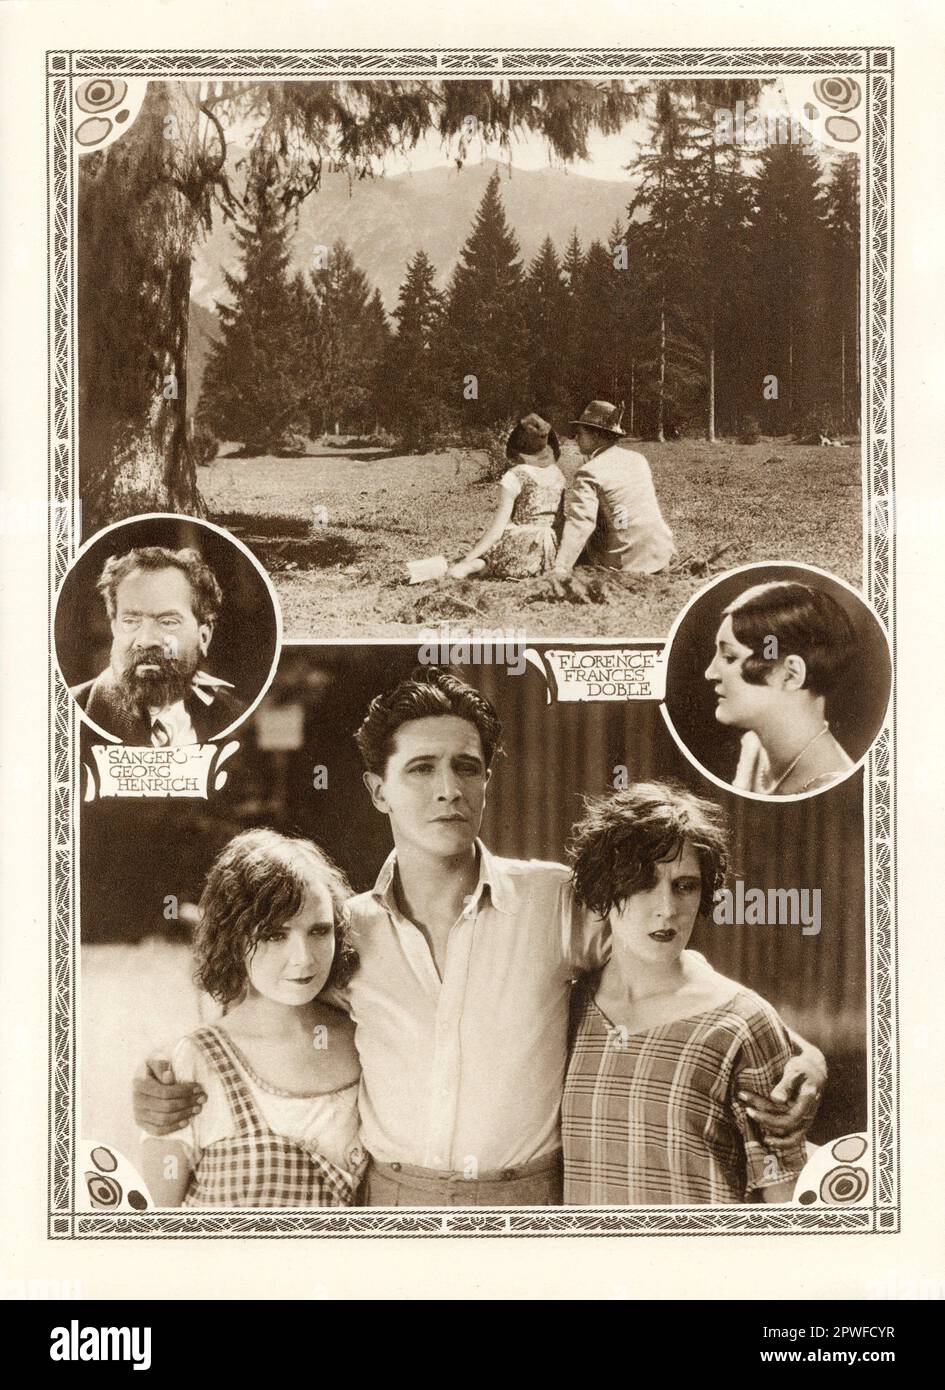 IVOR NOVELLO MABEL POULTON GEORG HEINRICH and FRANCES DOBLE in THE CONSTANT NYMPH 1928 director ADRIAN BRUNEL play / screen adaptation Margaret Kennedy and Basil Dean continuity Alma Reville producers Michael Balcon and Basil Dean Gainsborough Pictures / Woolf and Freedman Film Service Stock Photo